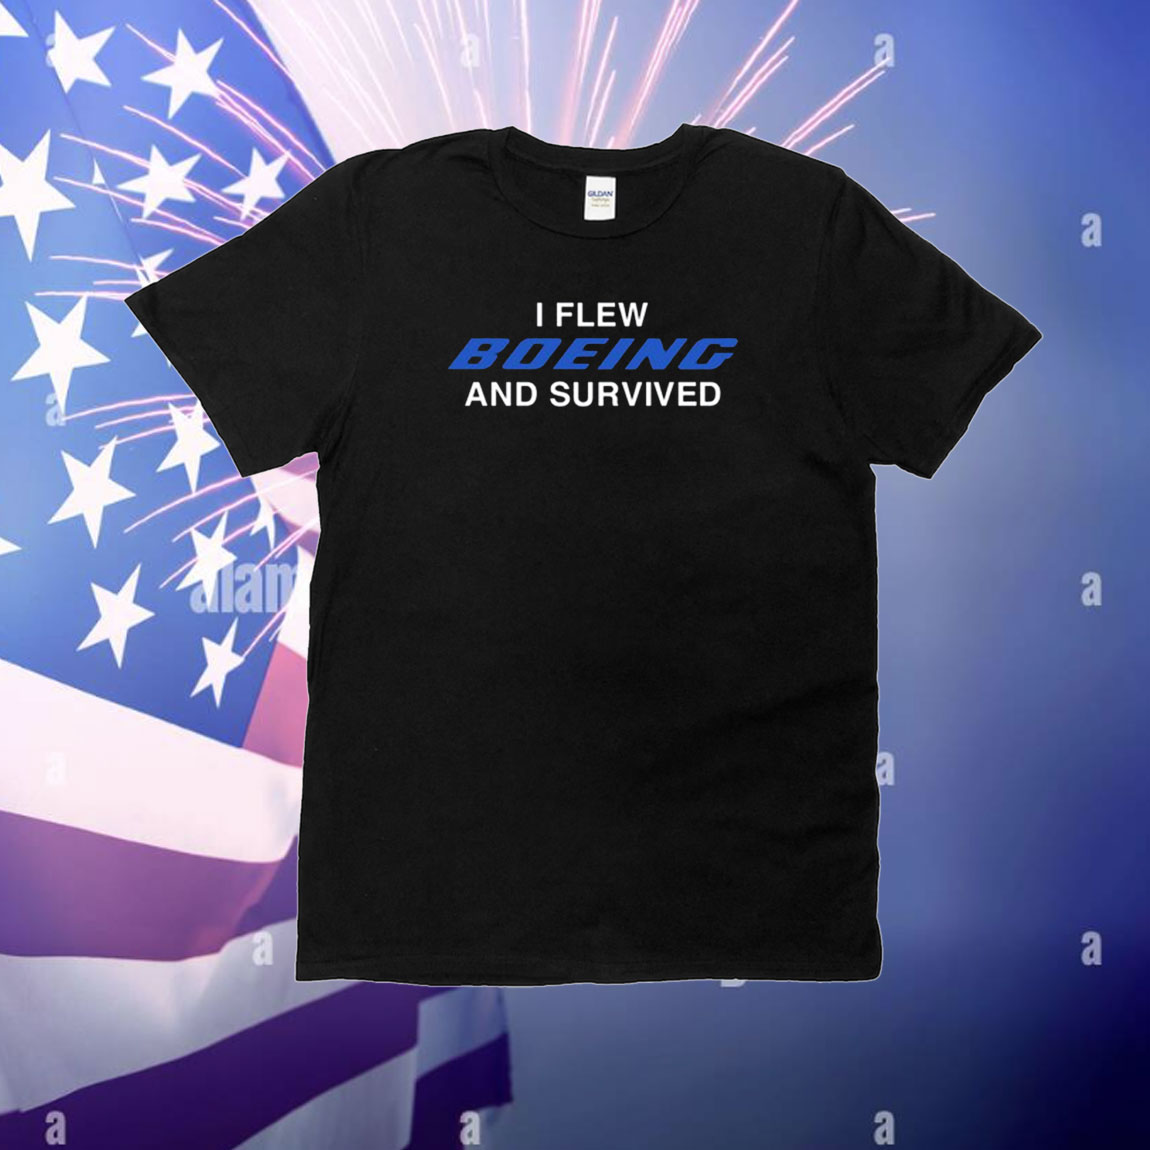 I Flew Boeing And Survived T-Shirt